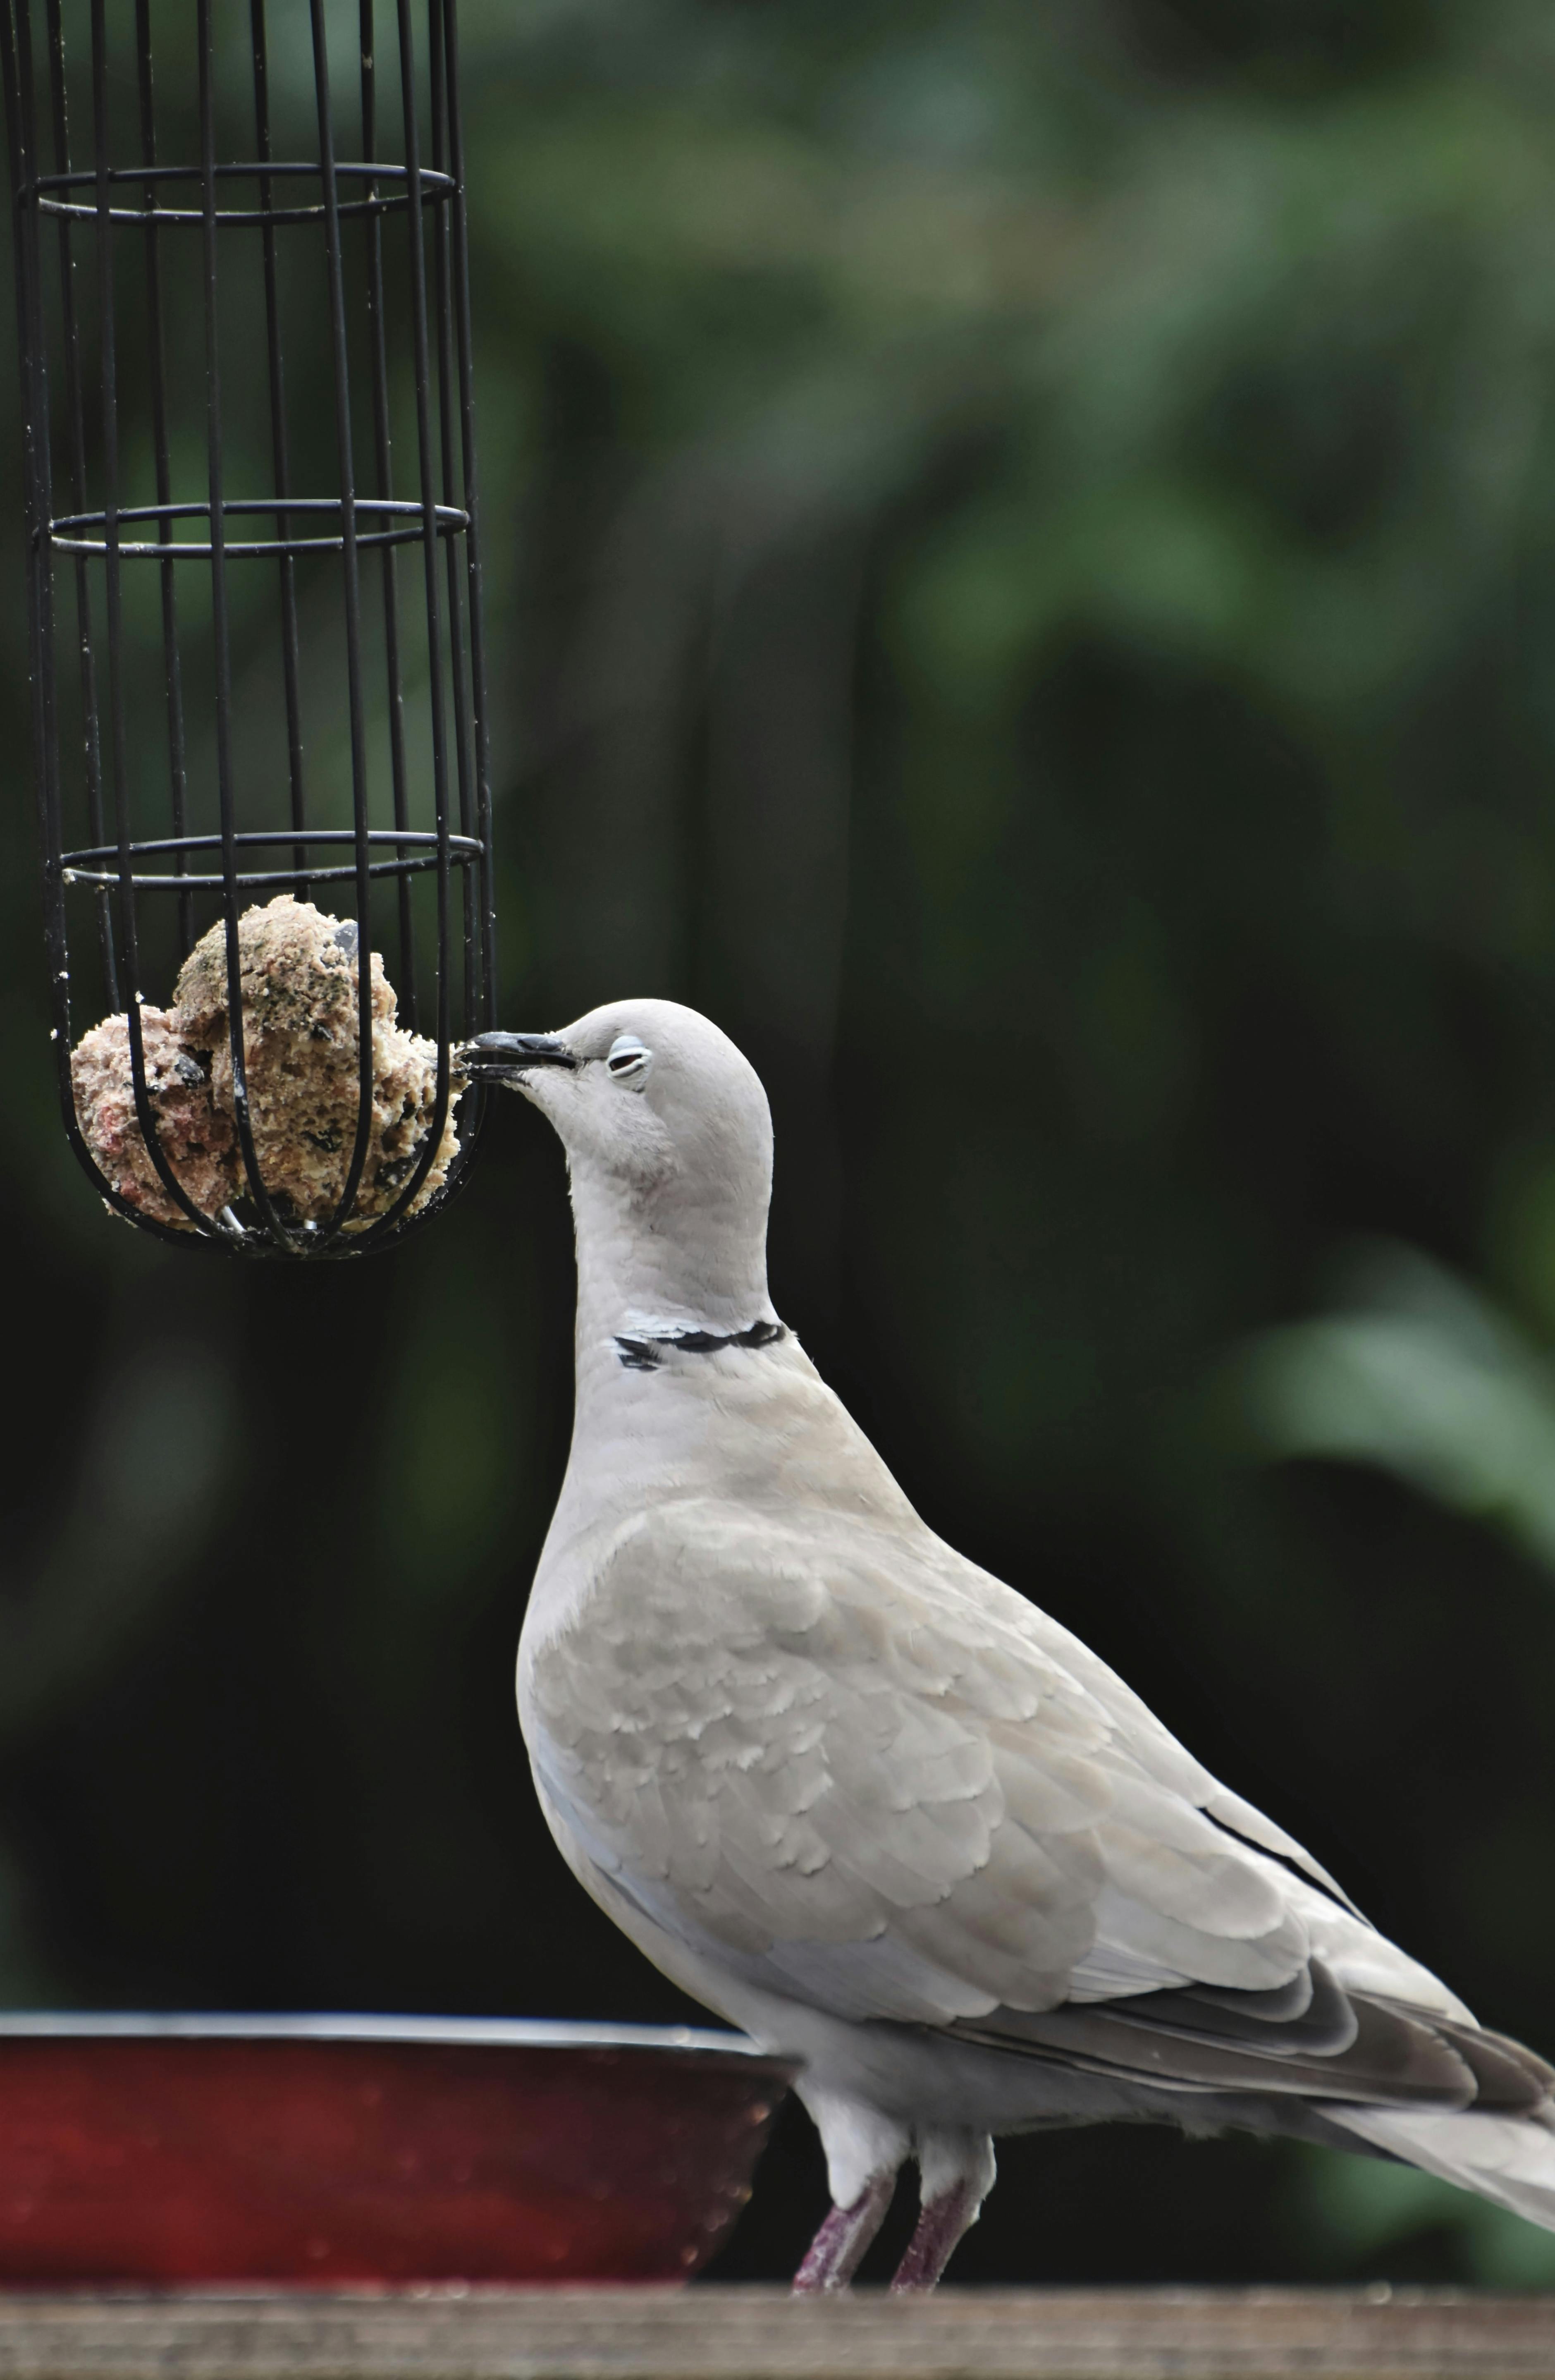 "Tips for placing and maintaining a platform bird feeder"